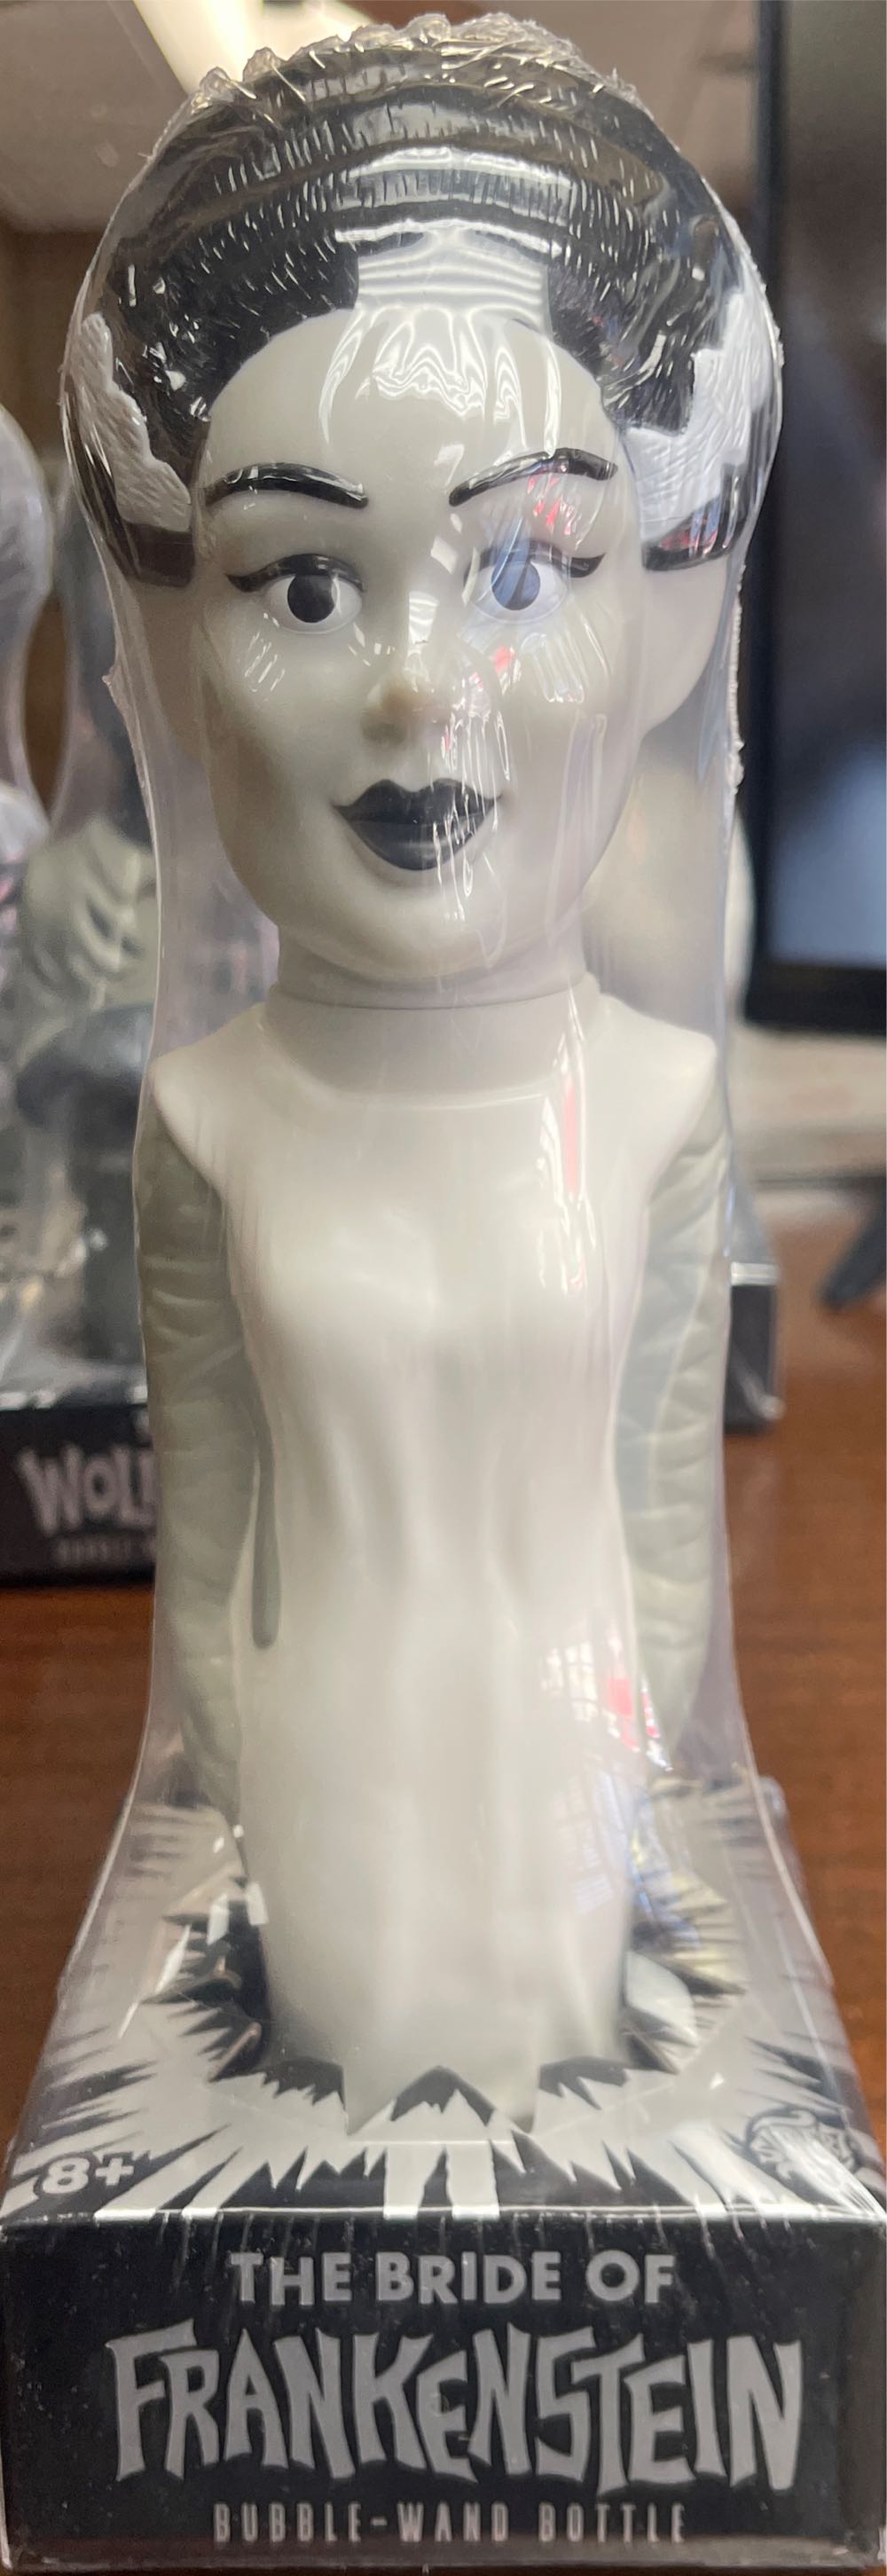 The Bride Of Frankenstein Bubble-Wand Bottle - Super 7 action figure collectible [Barcode 840049829664] - Main Image 1